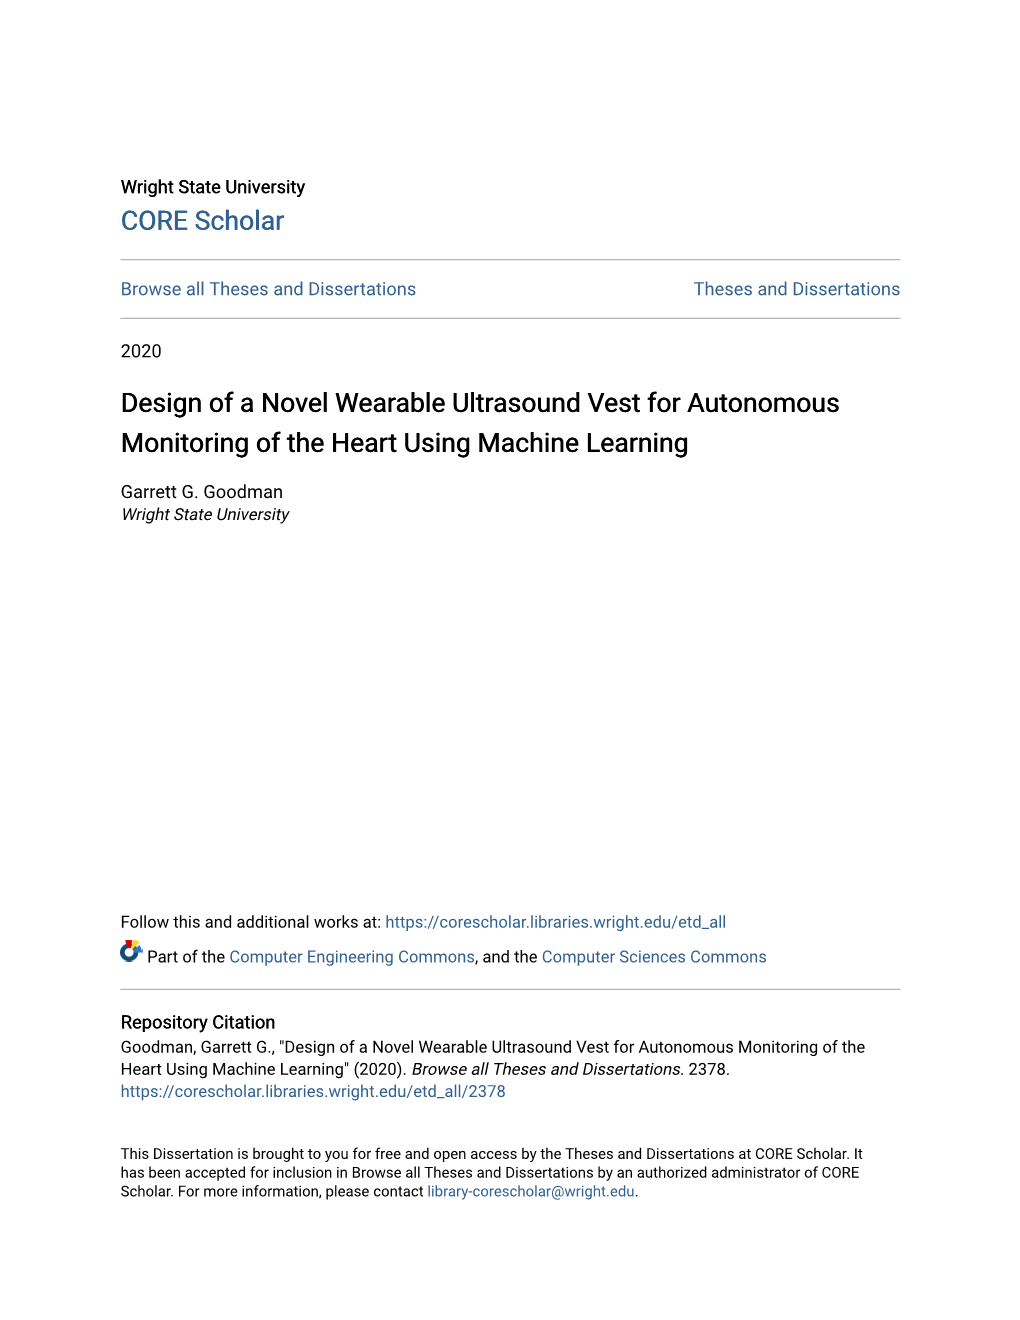 Design of a Novel Wearable Ultrasound Vest for Autonomous Monitoring of the Heart Using Machine Learning